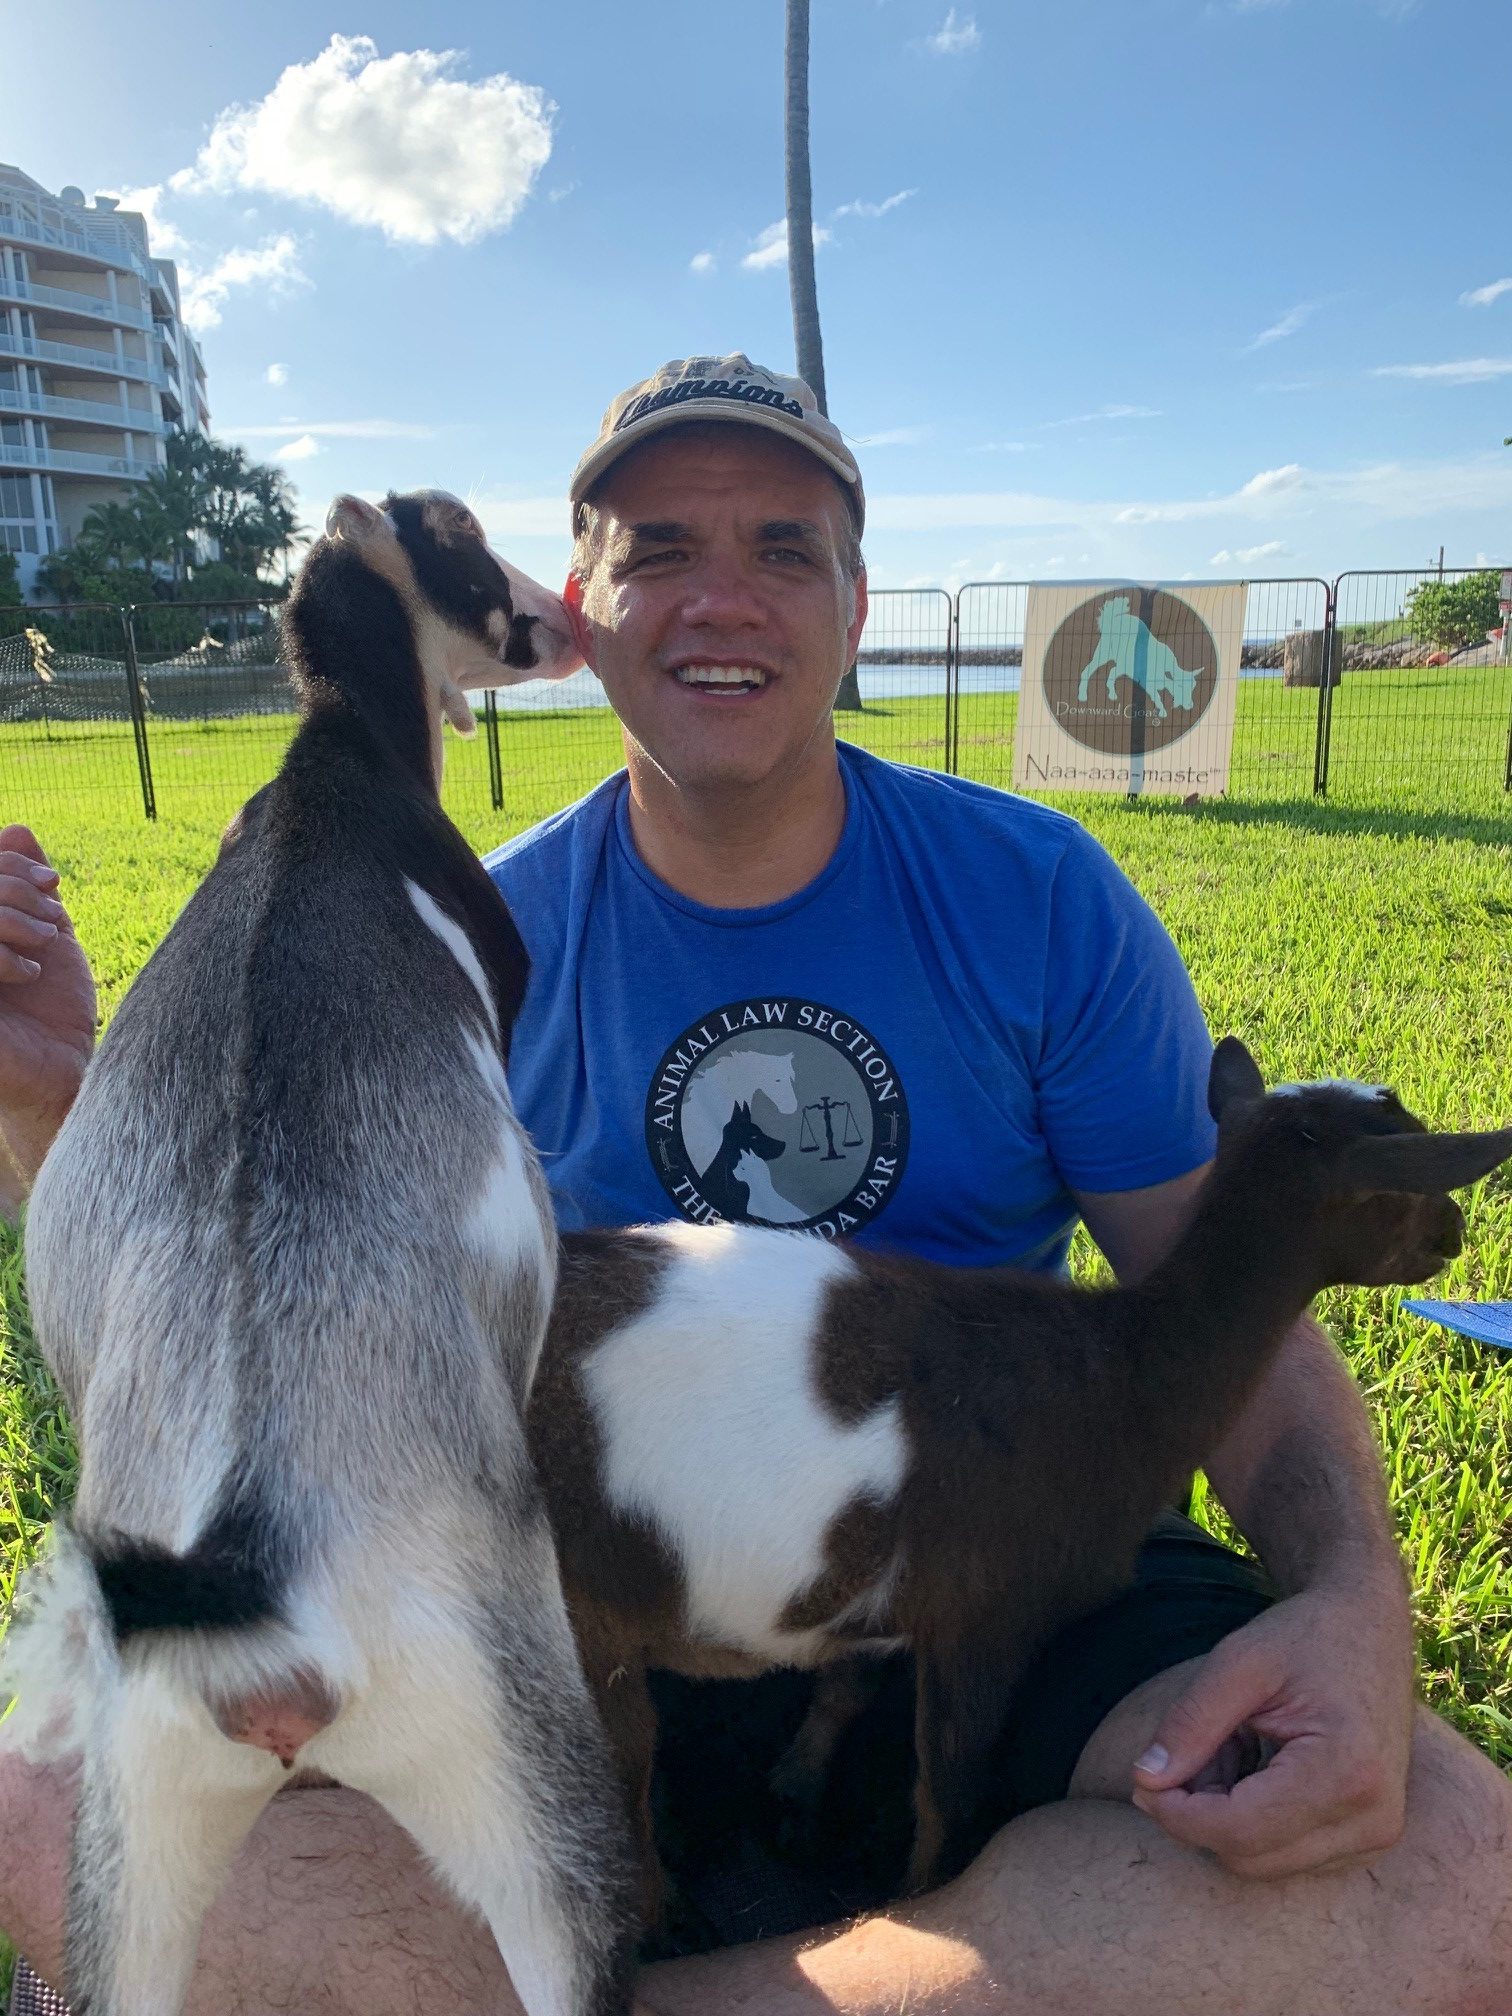 matt with two large goats, one in his lap and the other one biting his ear